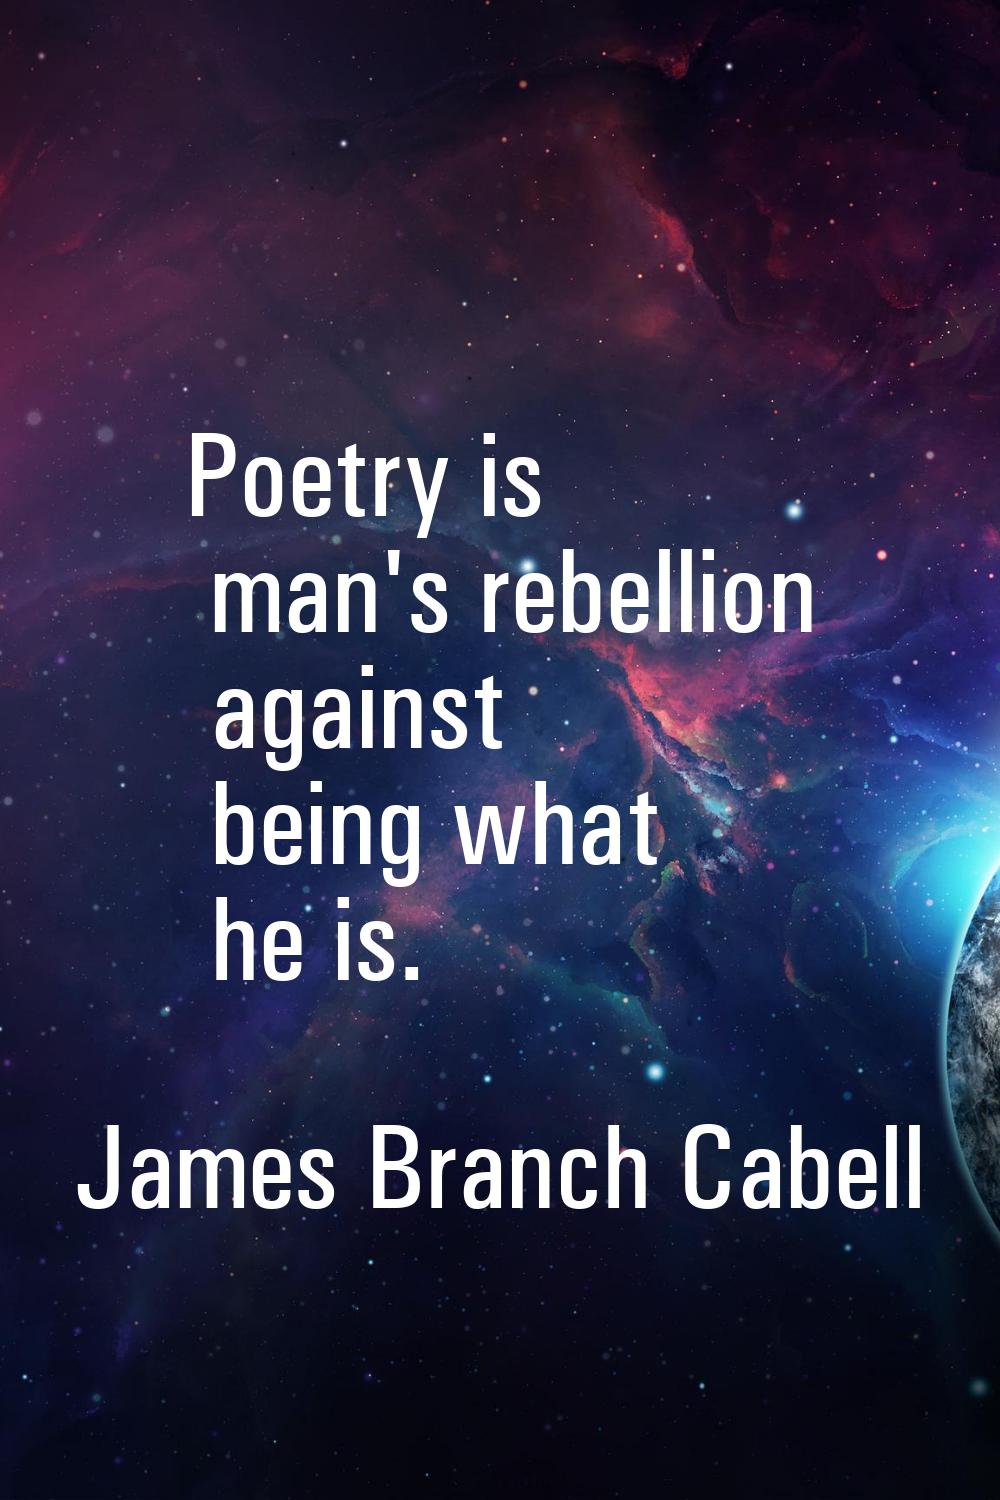 Poetry is man's rebellion against being what he is.